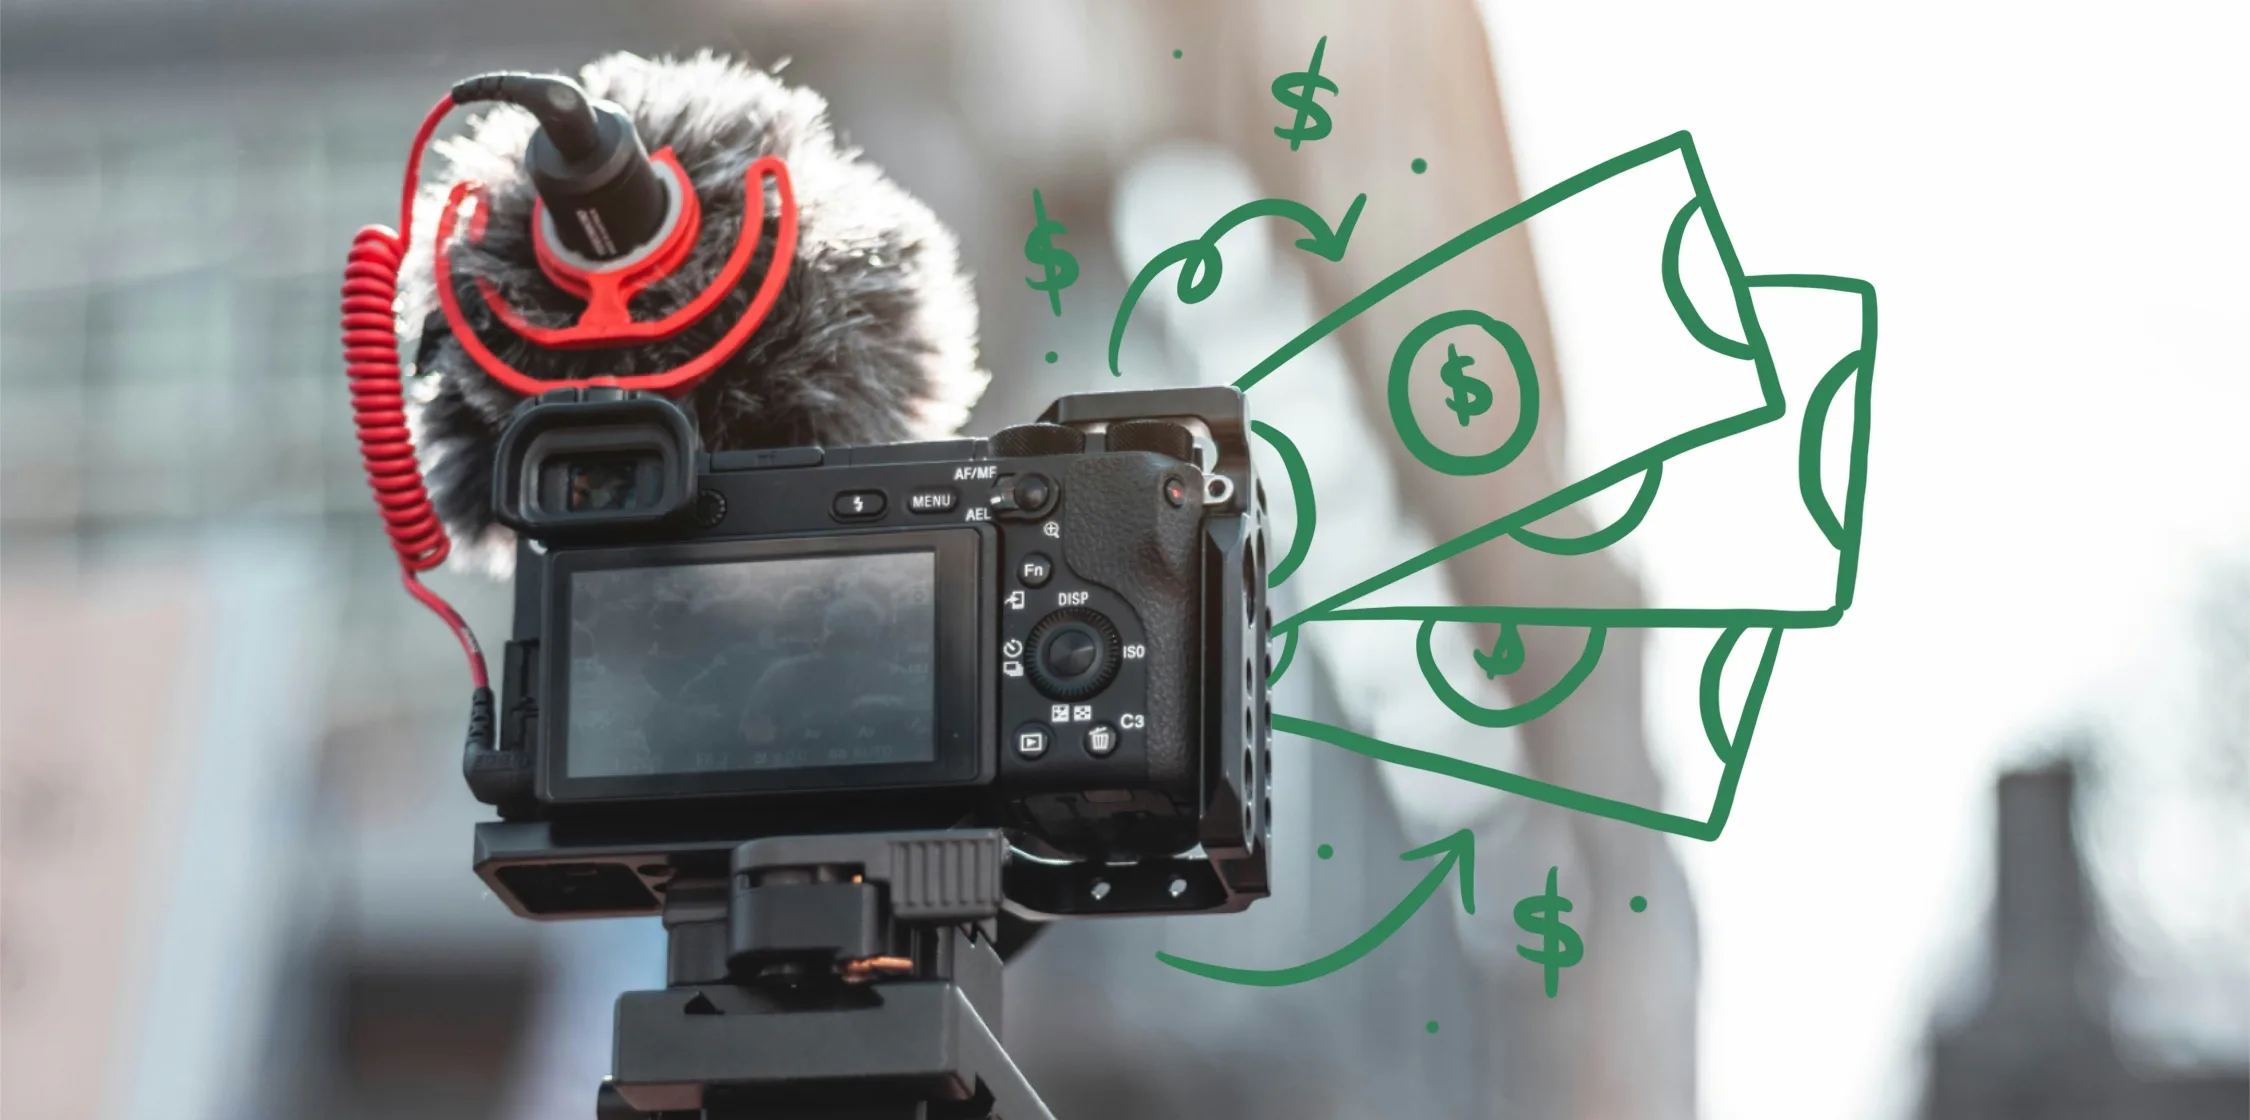 How to make money on YouTube as a creator: 12 tips for success